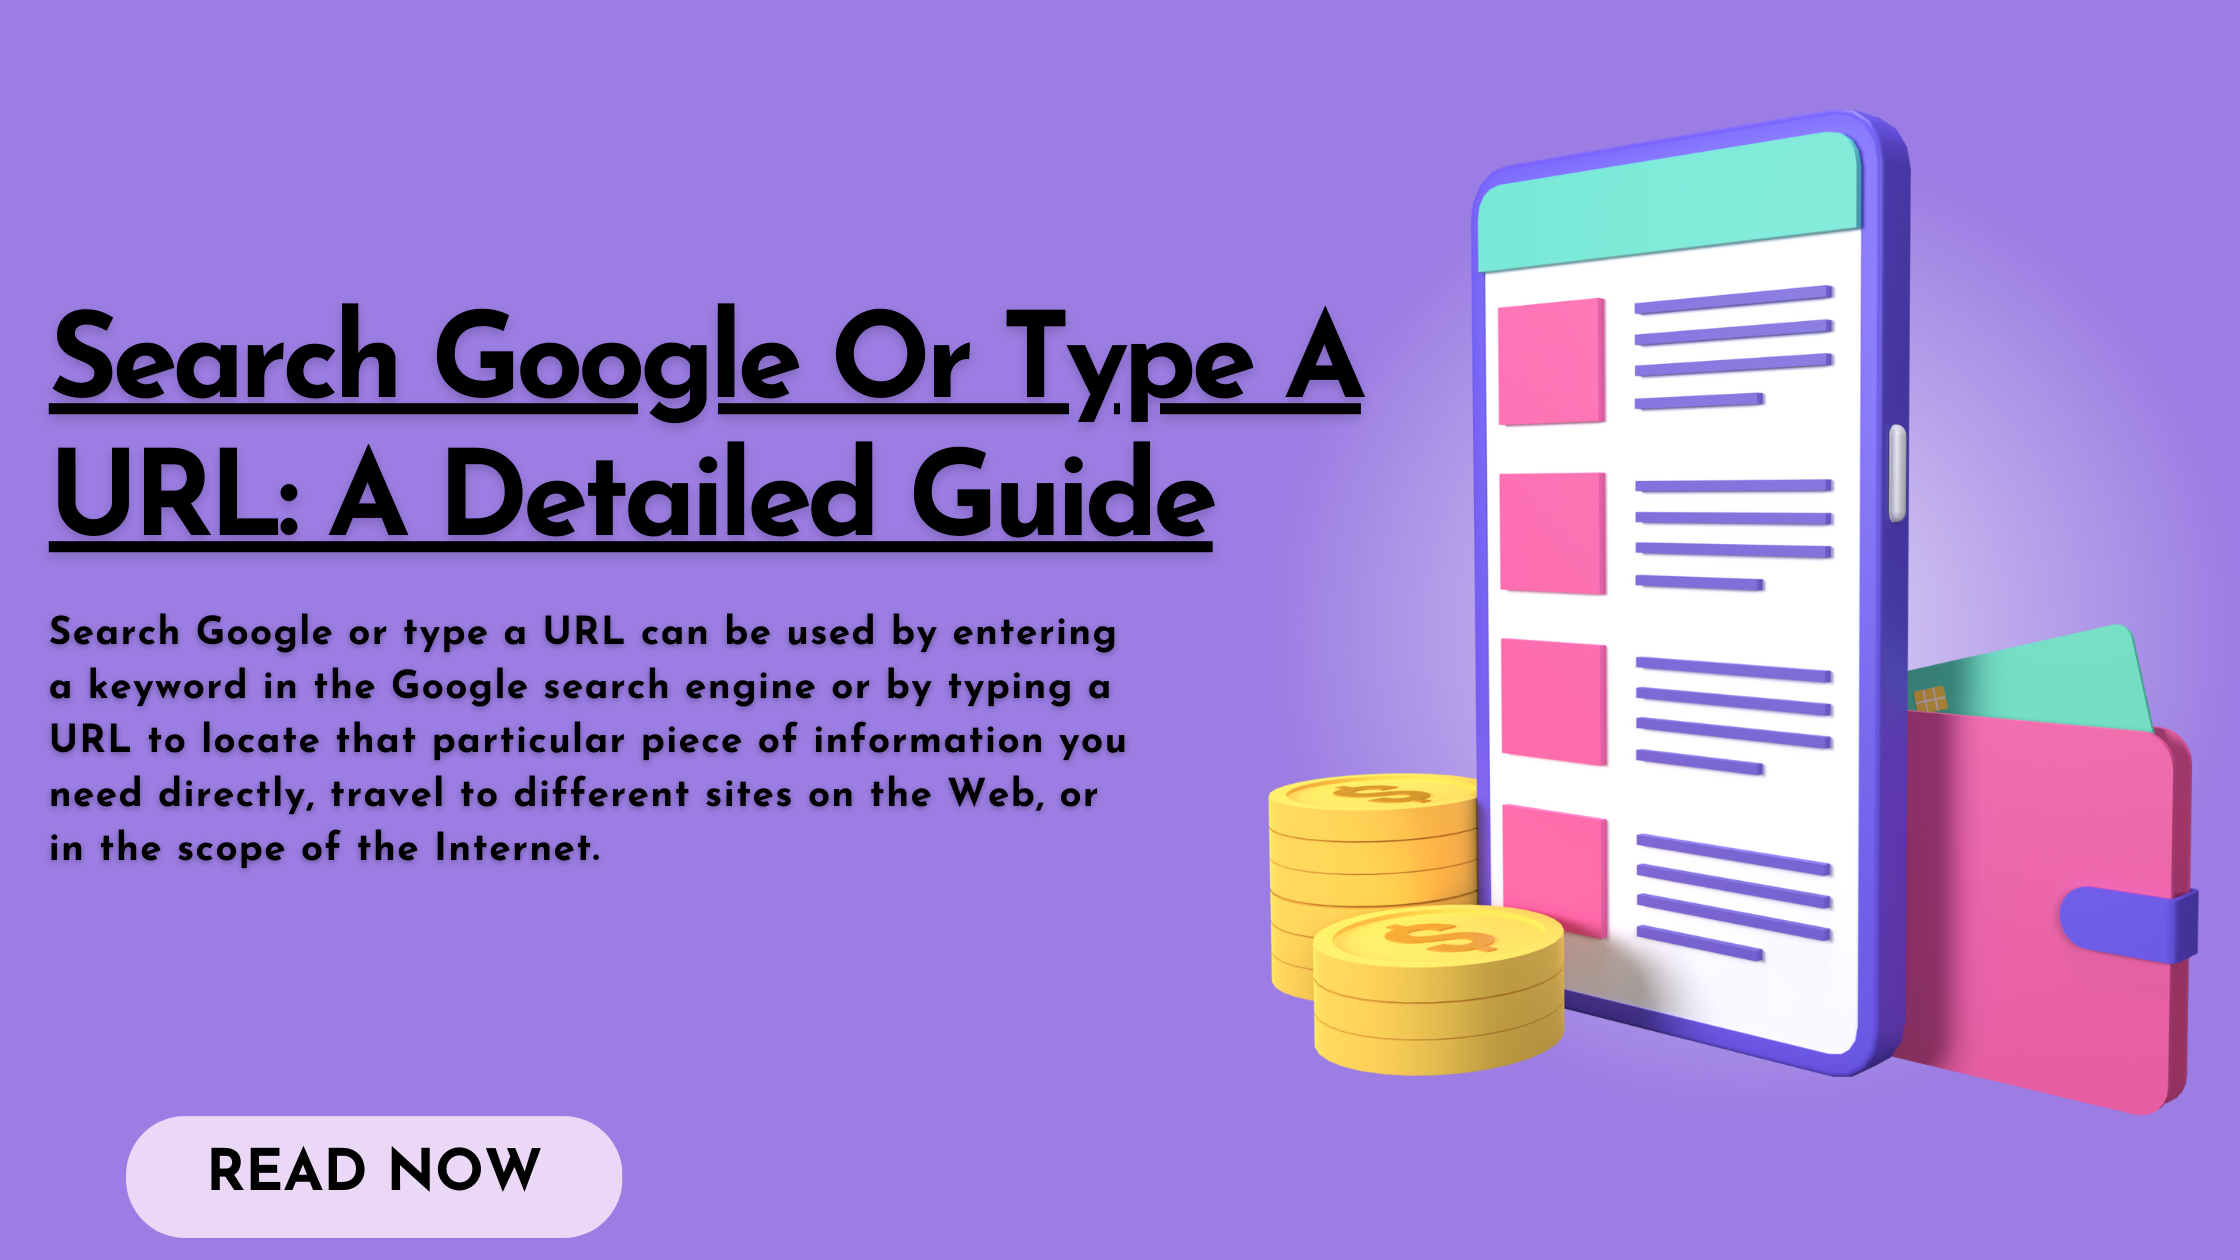 Search Google Or Type A URL: A Detailed Guide